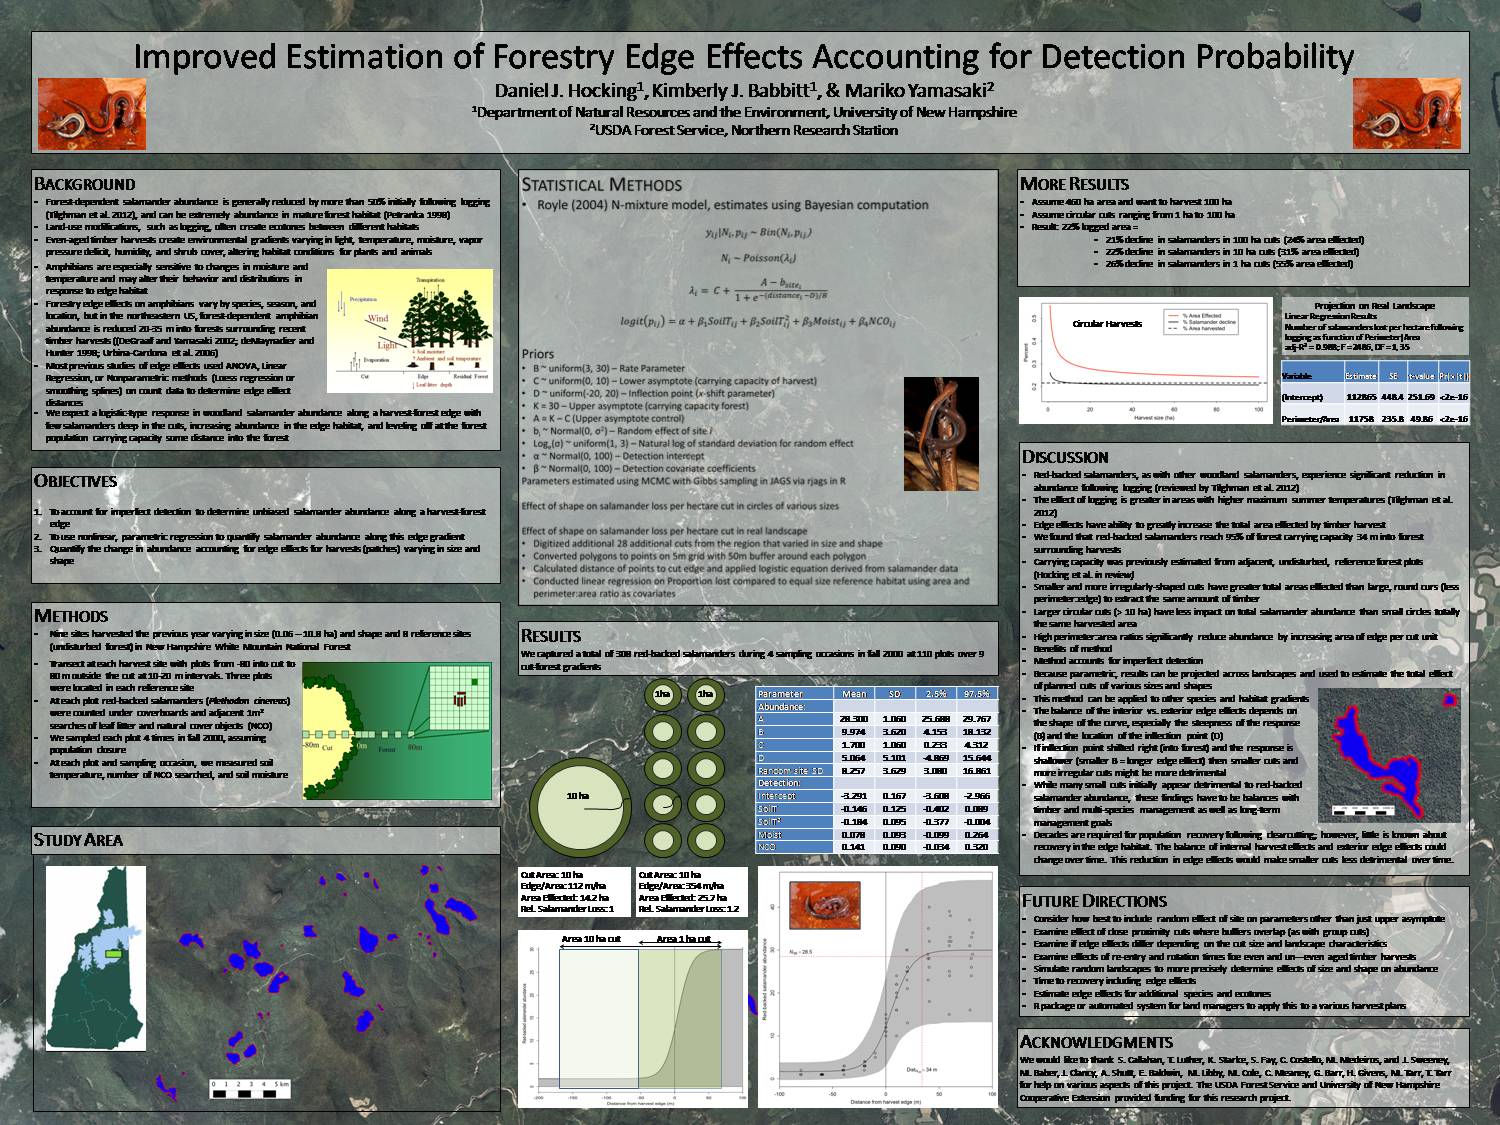 Improved Estimation Of Forestry Edge Effects Accounting For Detection Probability by dhocking